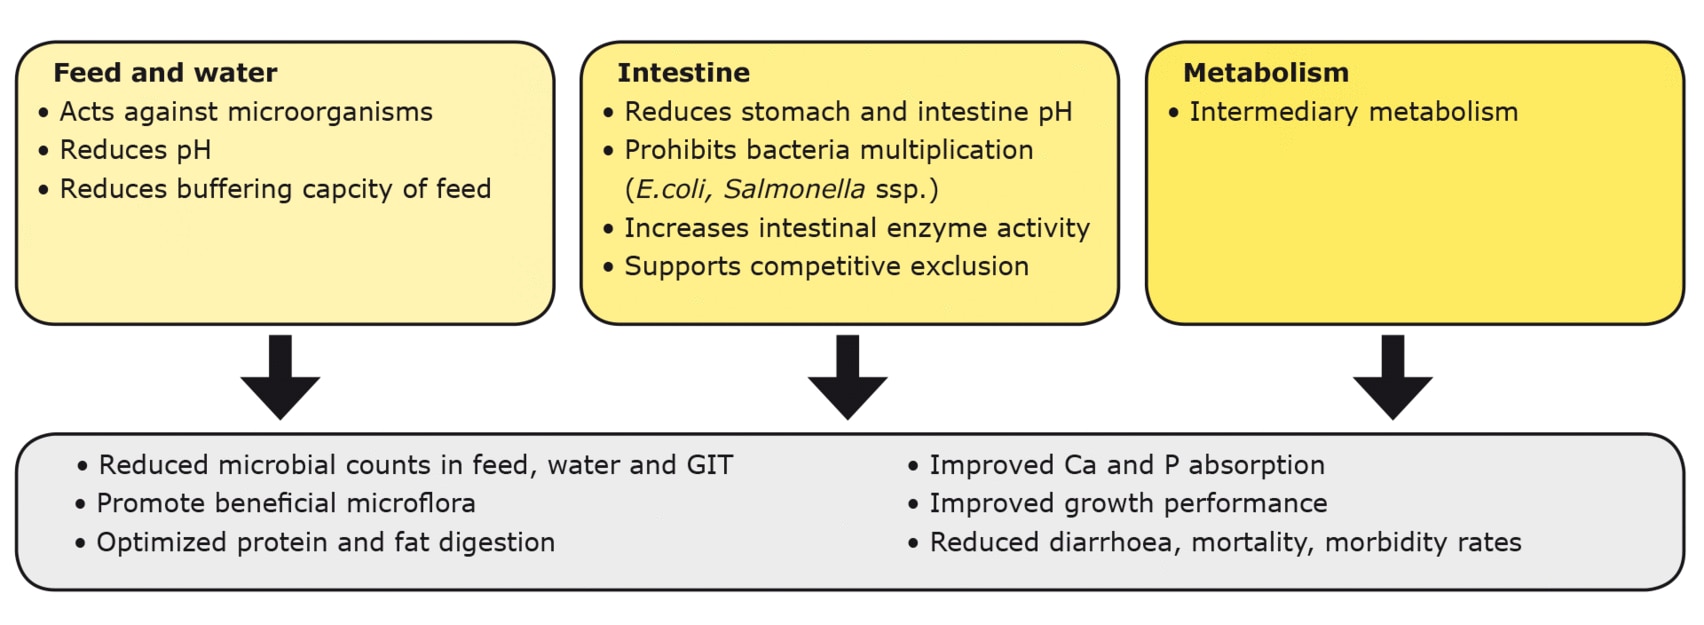 Figure 2. Mechanisms of organic acids in feed, water, gastrointestinal tract and intermediary metabolism.